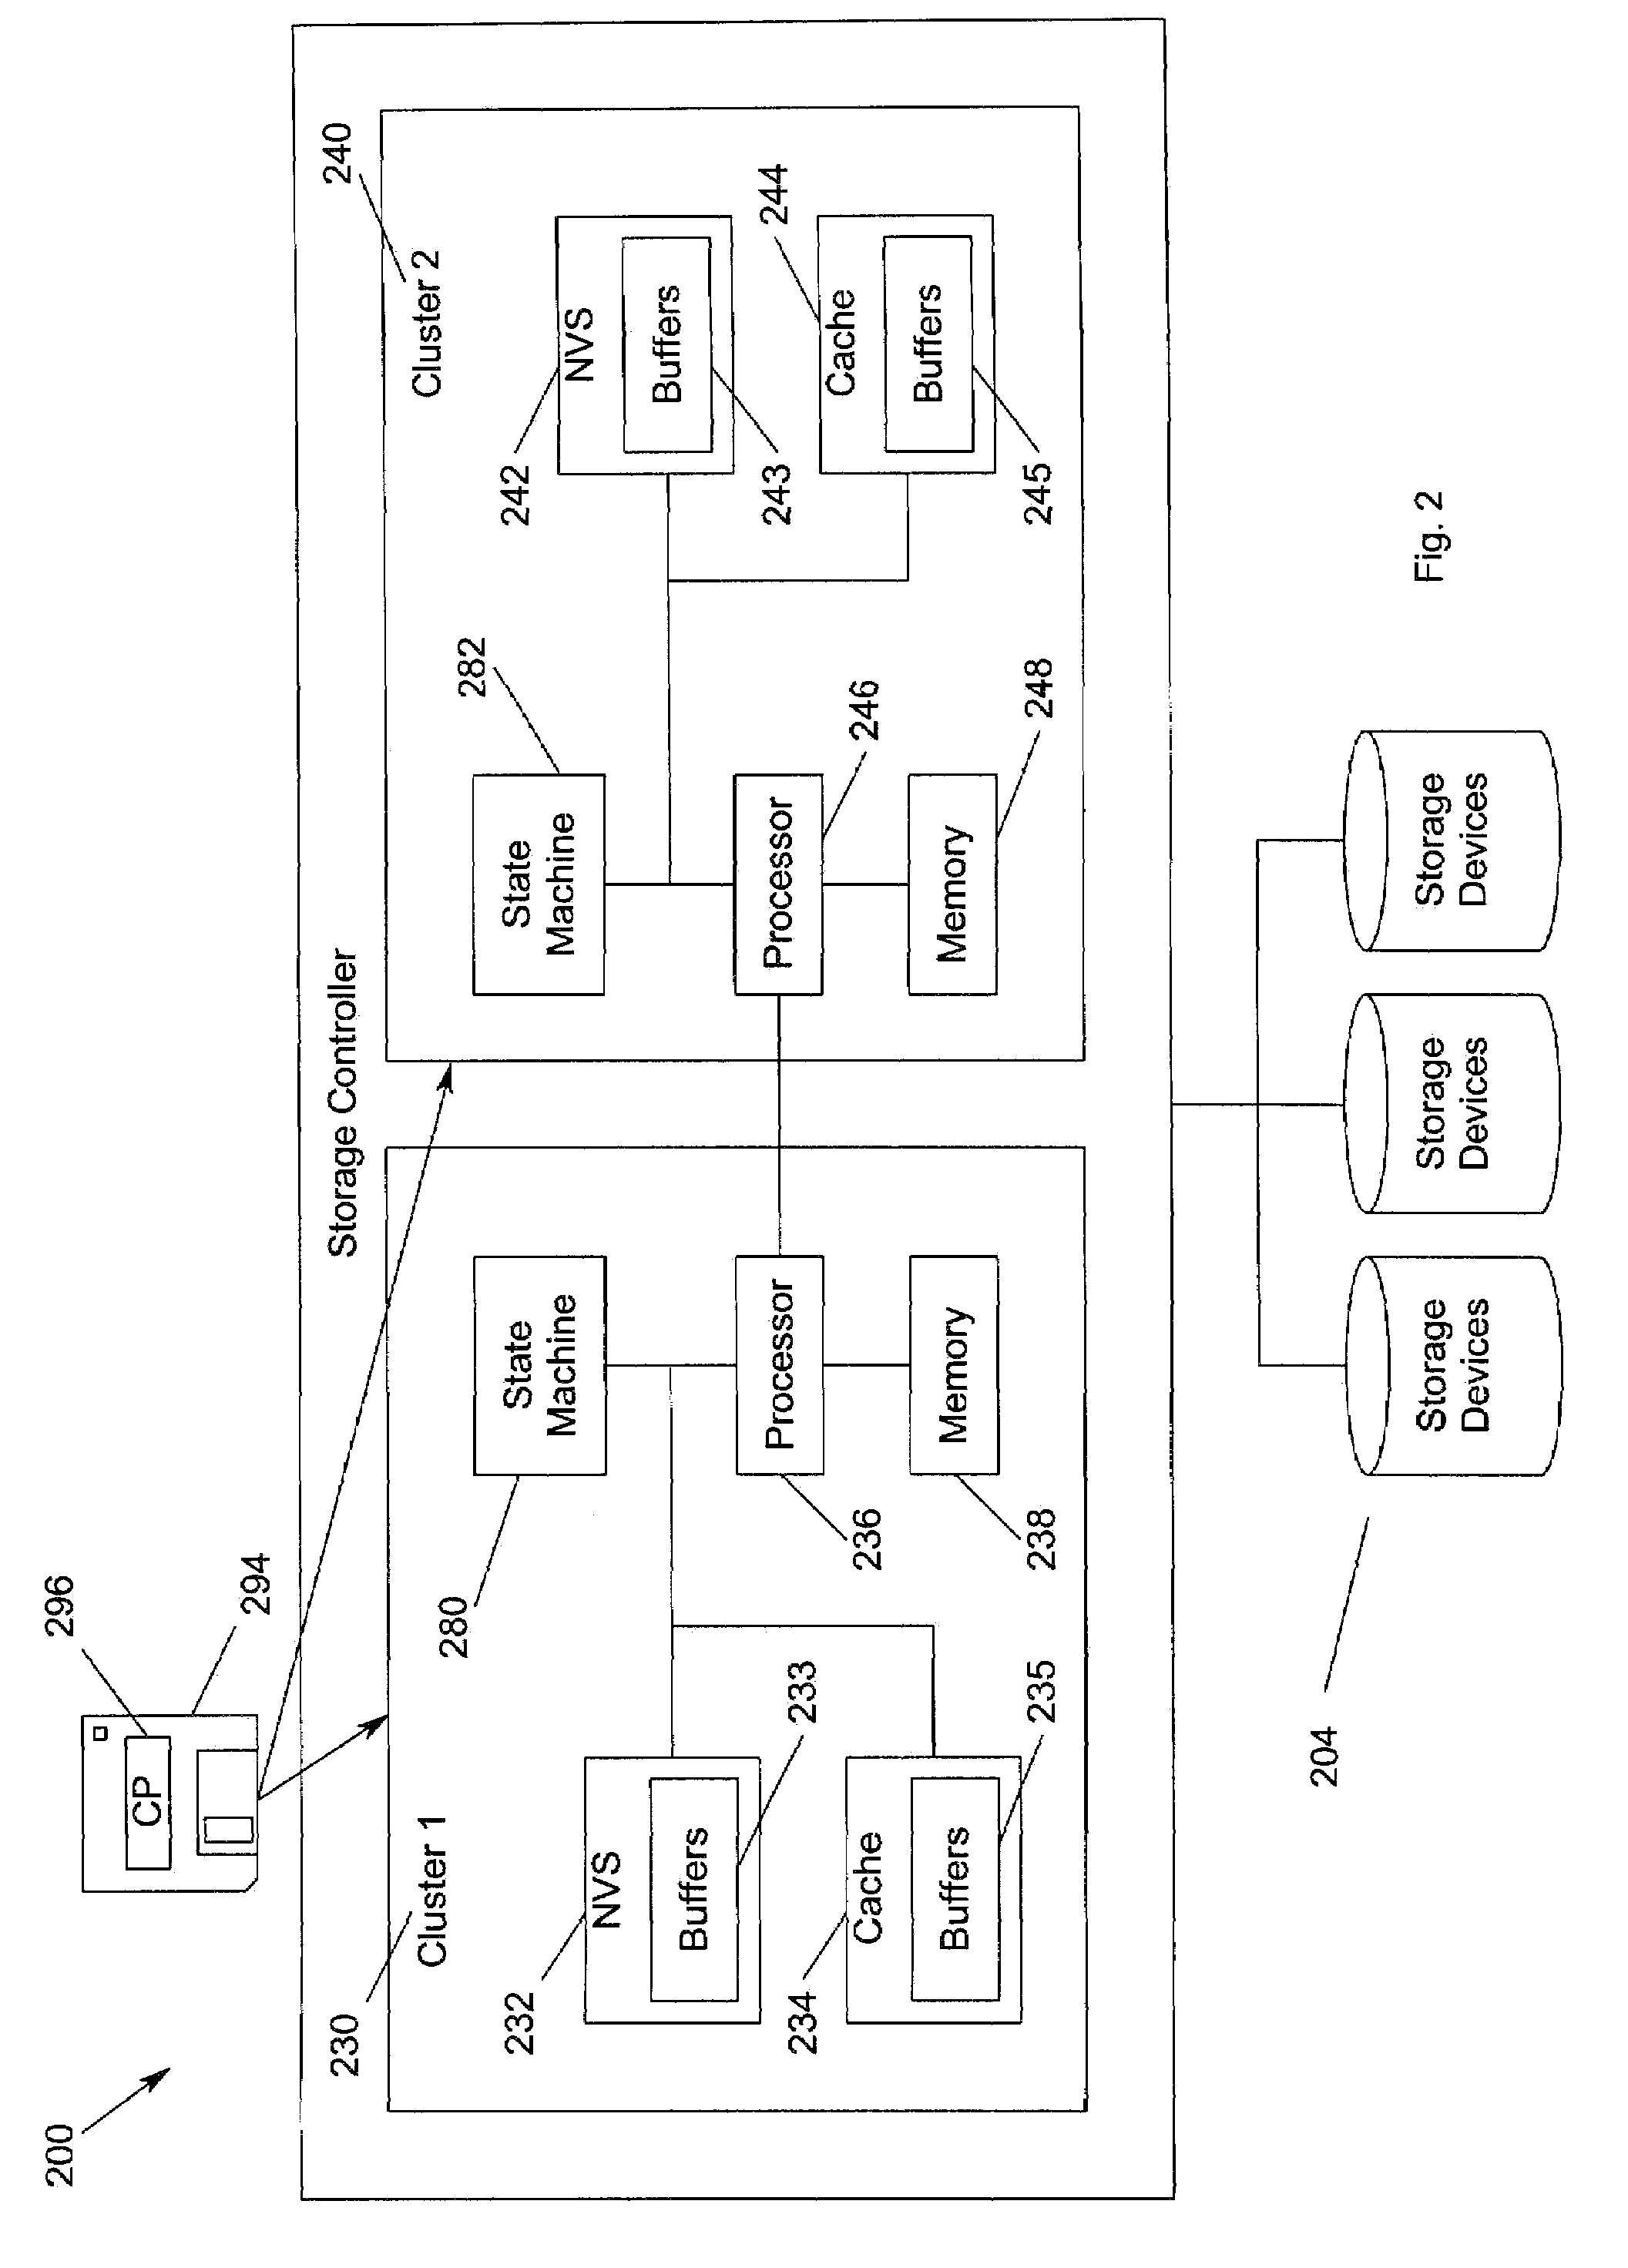 Method, apparatus and program storage device for providing automatic recovery from premature reboot of a system during a concurrent upgrade